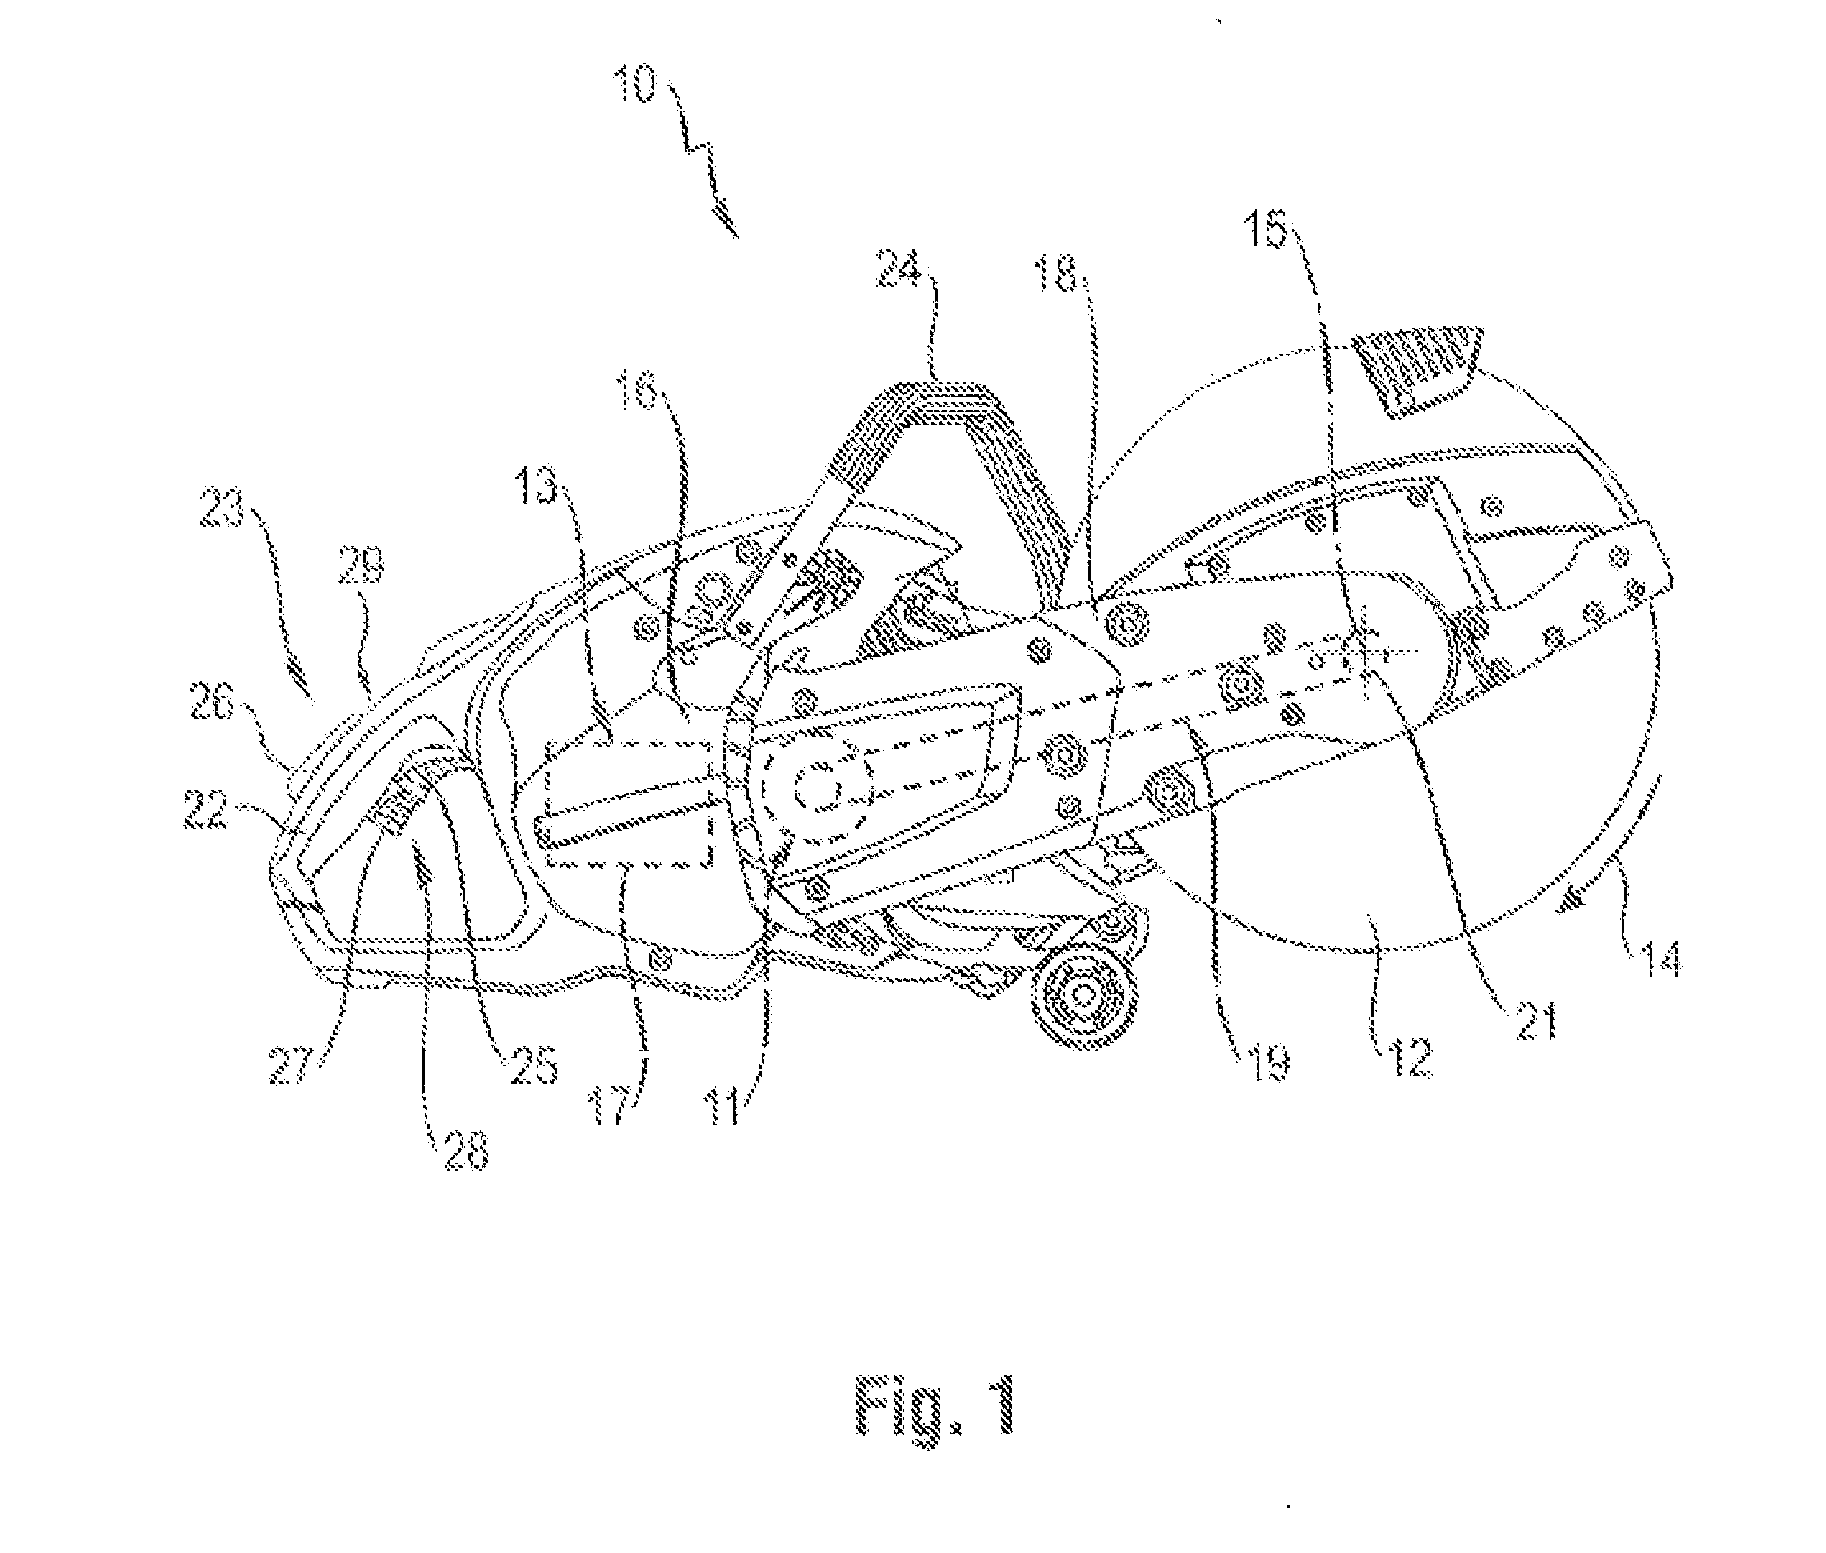 Hand-Operated Tool Device With A Brake Mechanism For Braking A Machining Tool